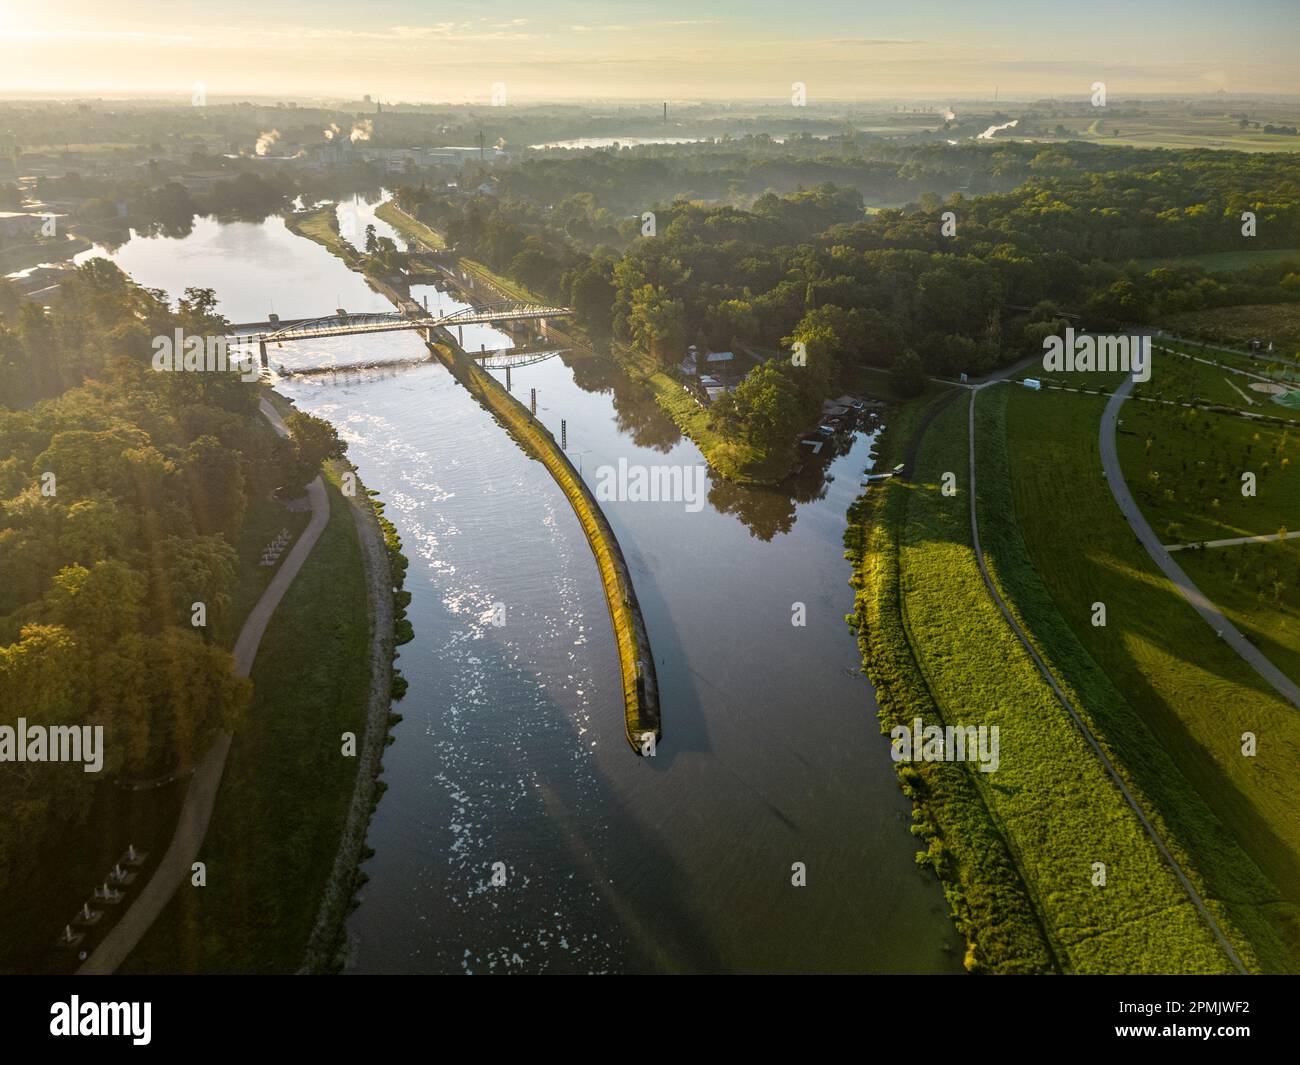 An aerial view of a winding river and bridge to Bolko Island, Irena Sendler, Opole, Poland Stock Photo